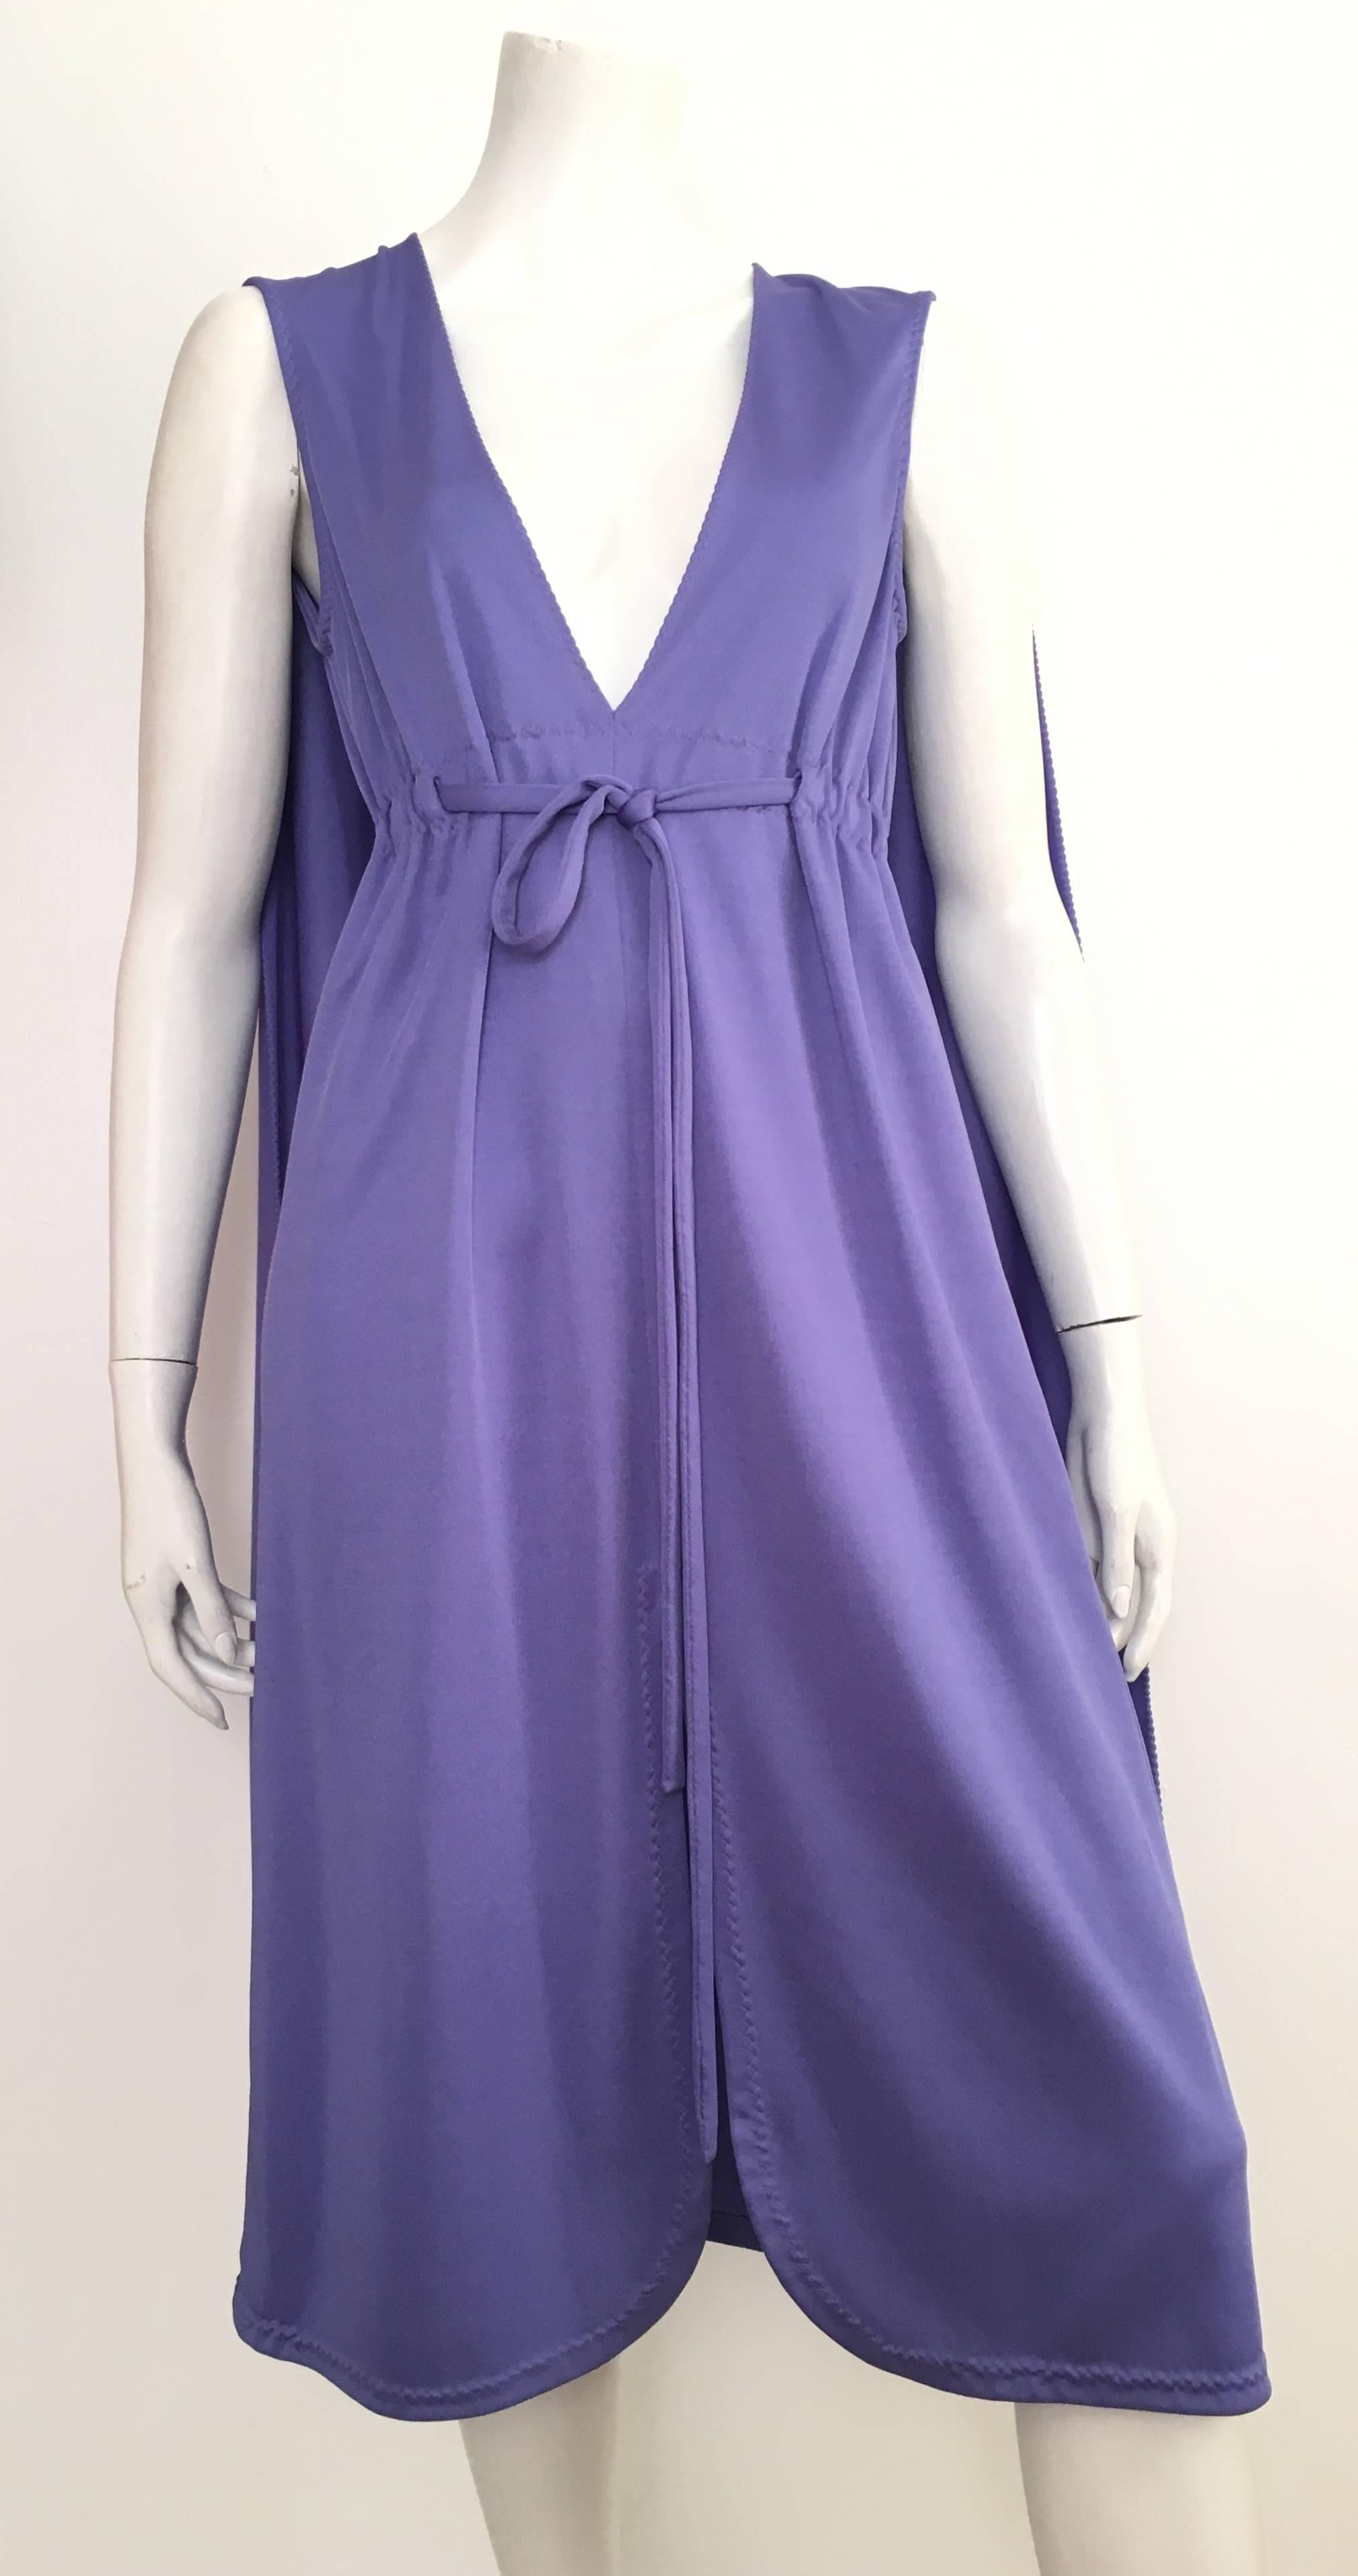 Stephen Burrows 1970s Cape Disco Dress With Pockets Size 4/6. 5